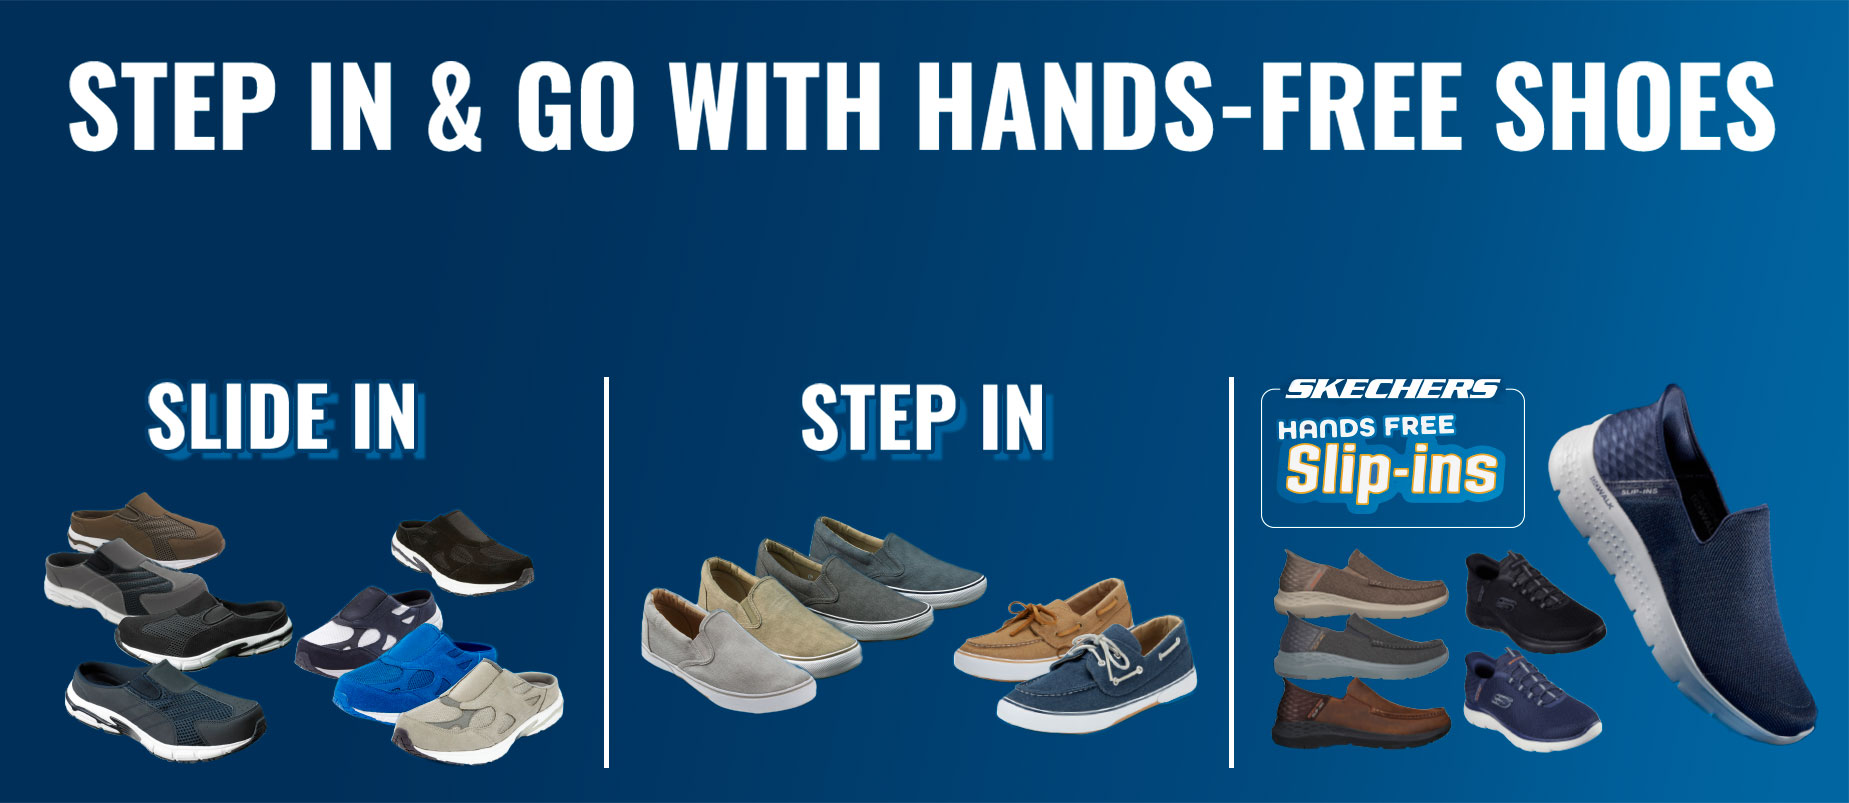 step in and go with hands-free shoes